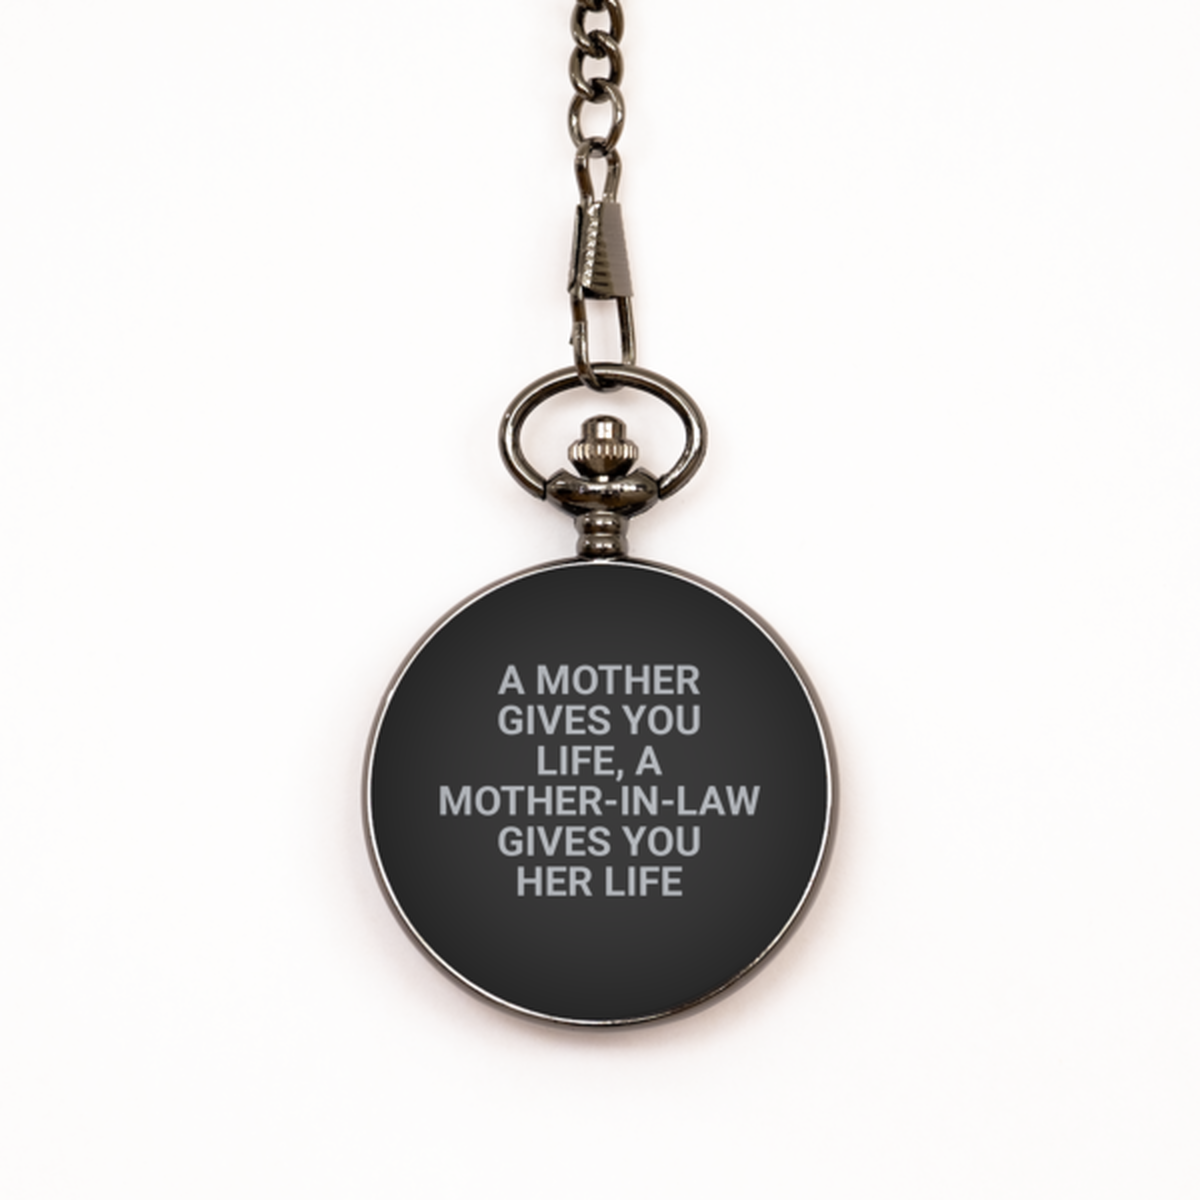 To My Mother-In-Law Black Pocket Watch, Gives You Life, Valentines Gifts For Mother-In-Law From Daughter-In-Law, Birthday Gifts For Women